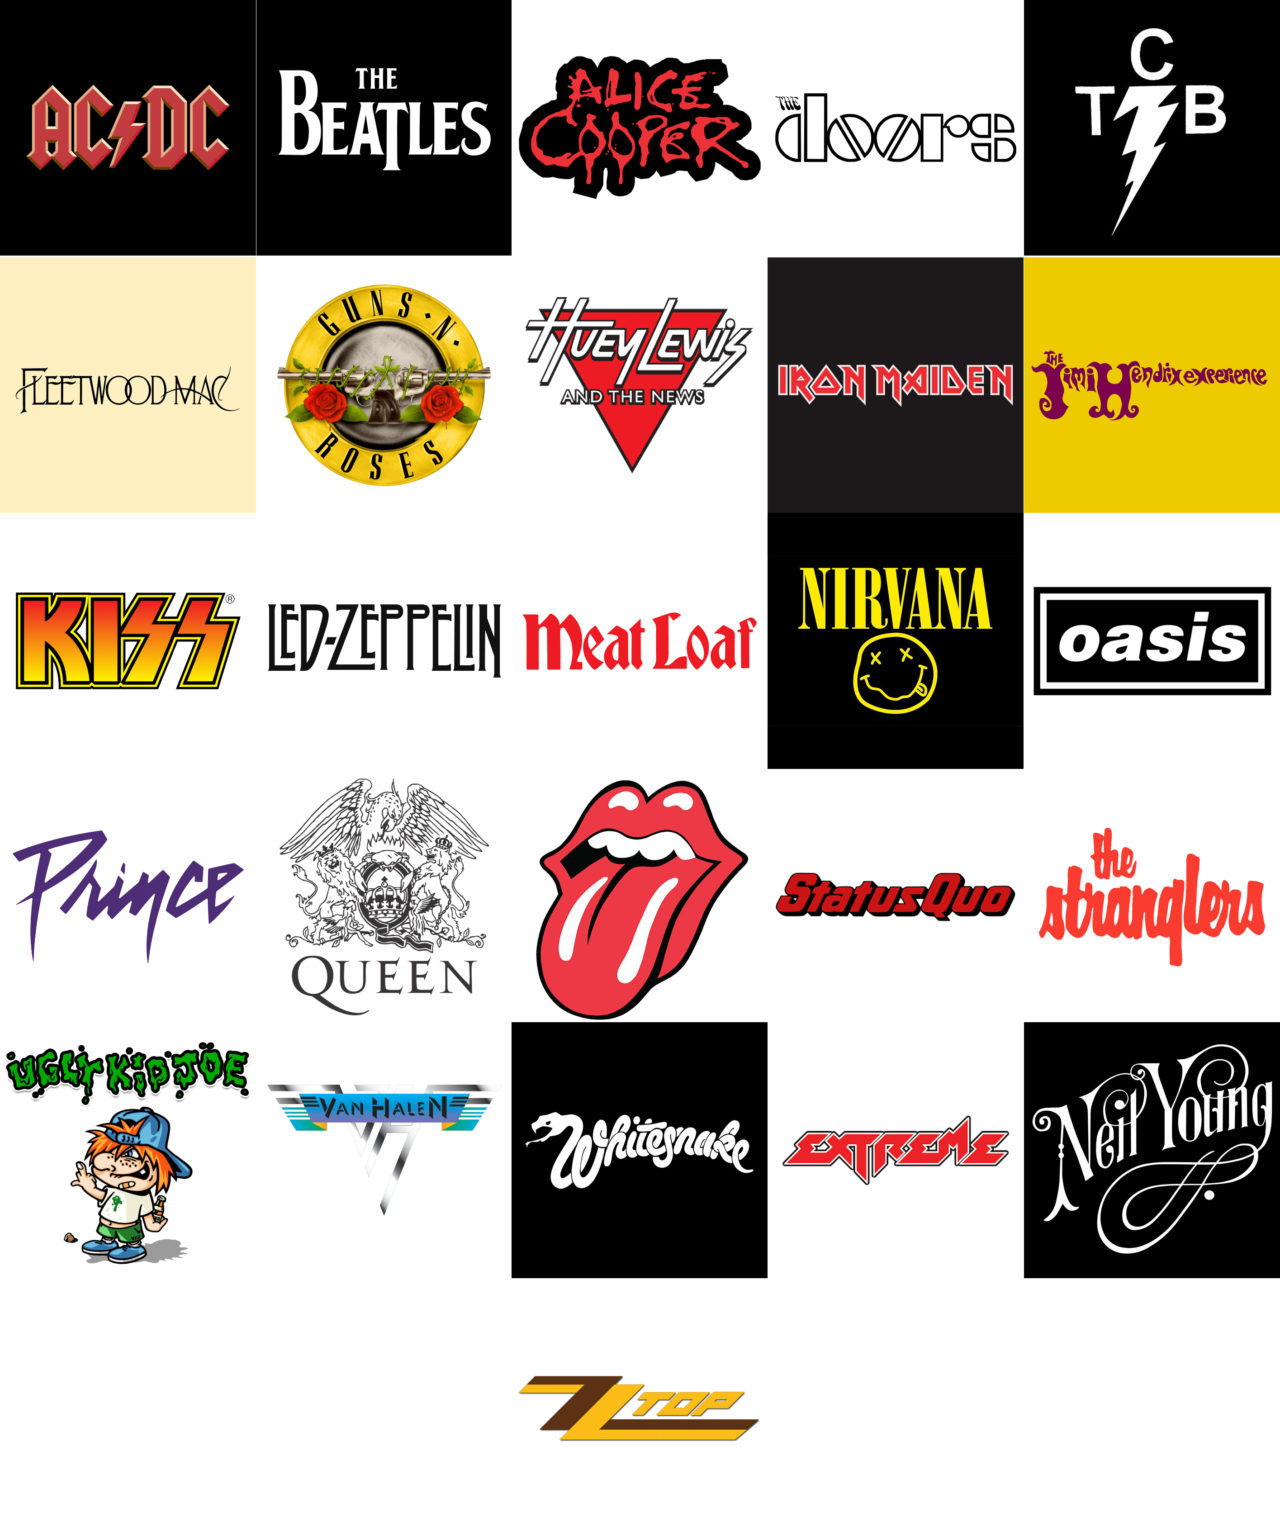 Grid of band logos used in the Bands quiz